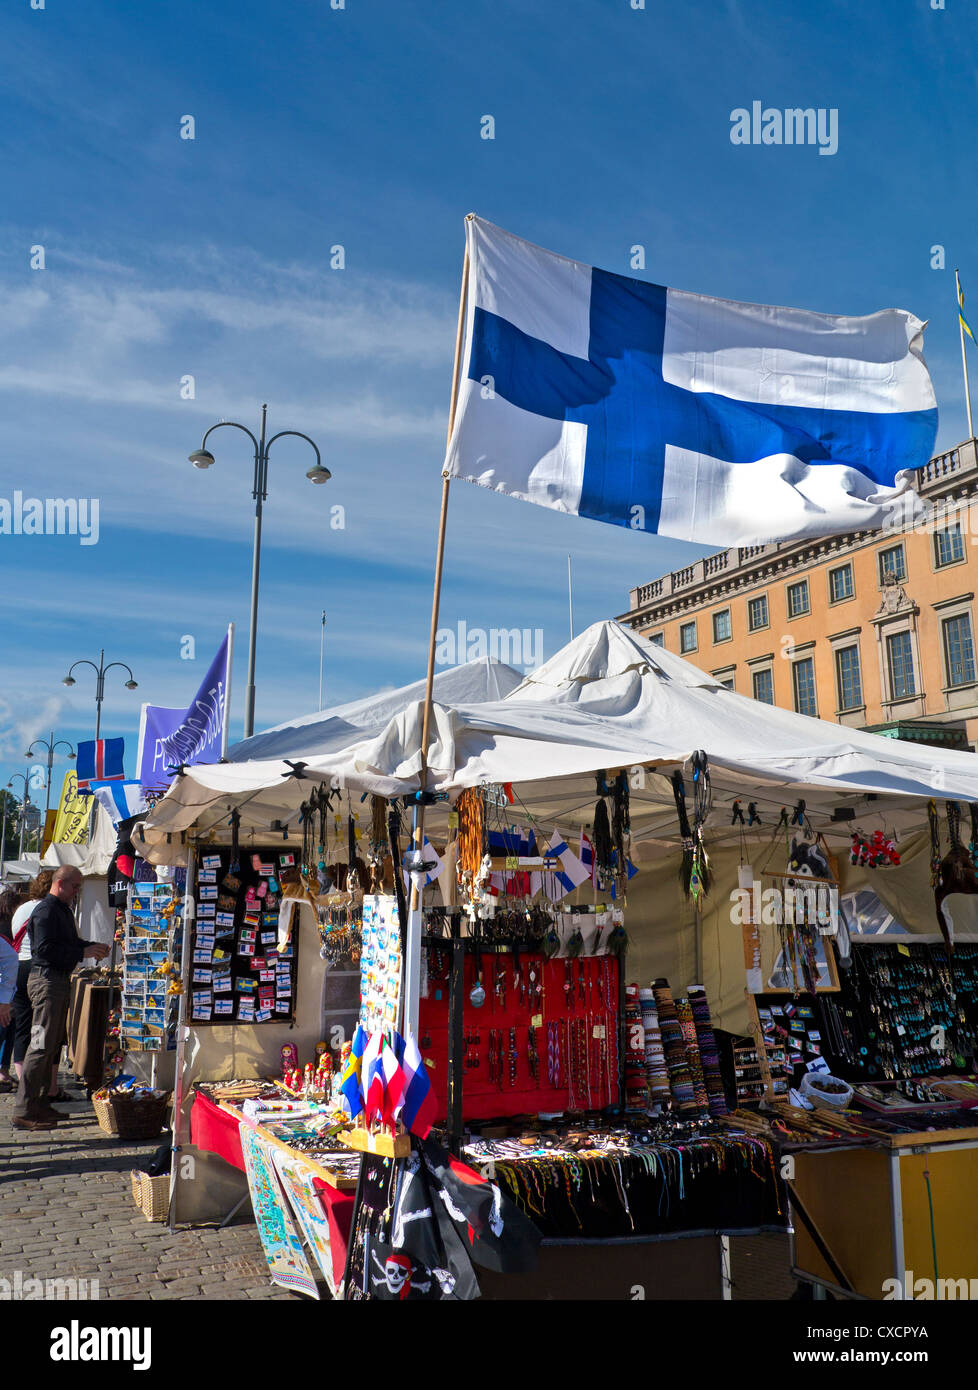 Helsinki harbour market stalls with national flag flying in foreground Helsinki Finland Stock Photo